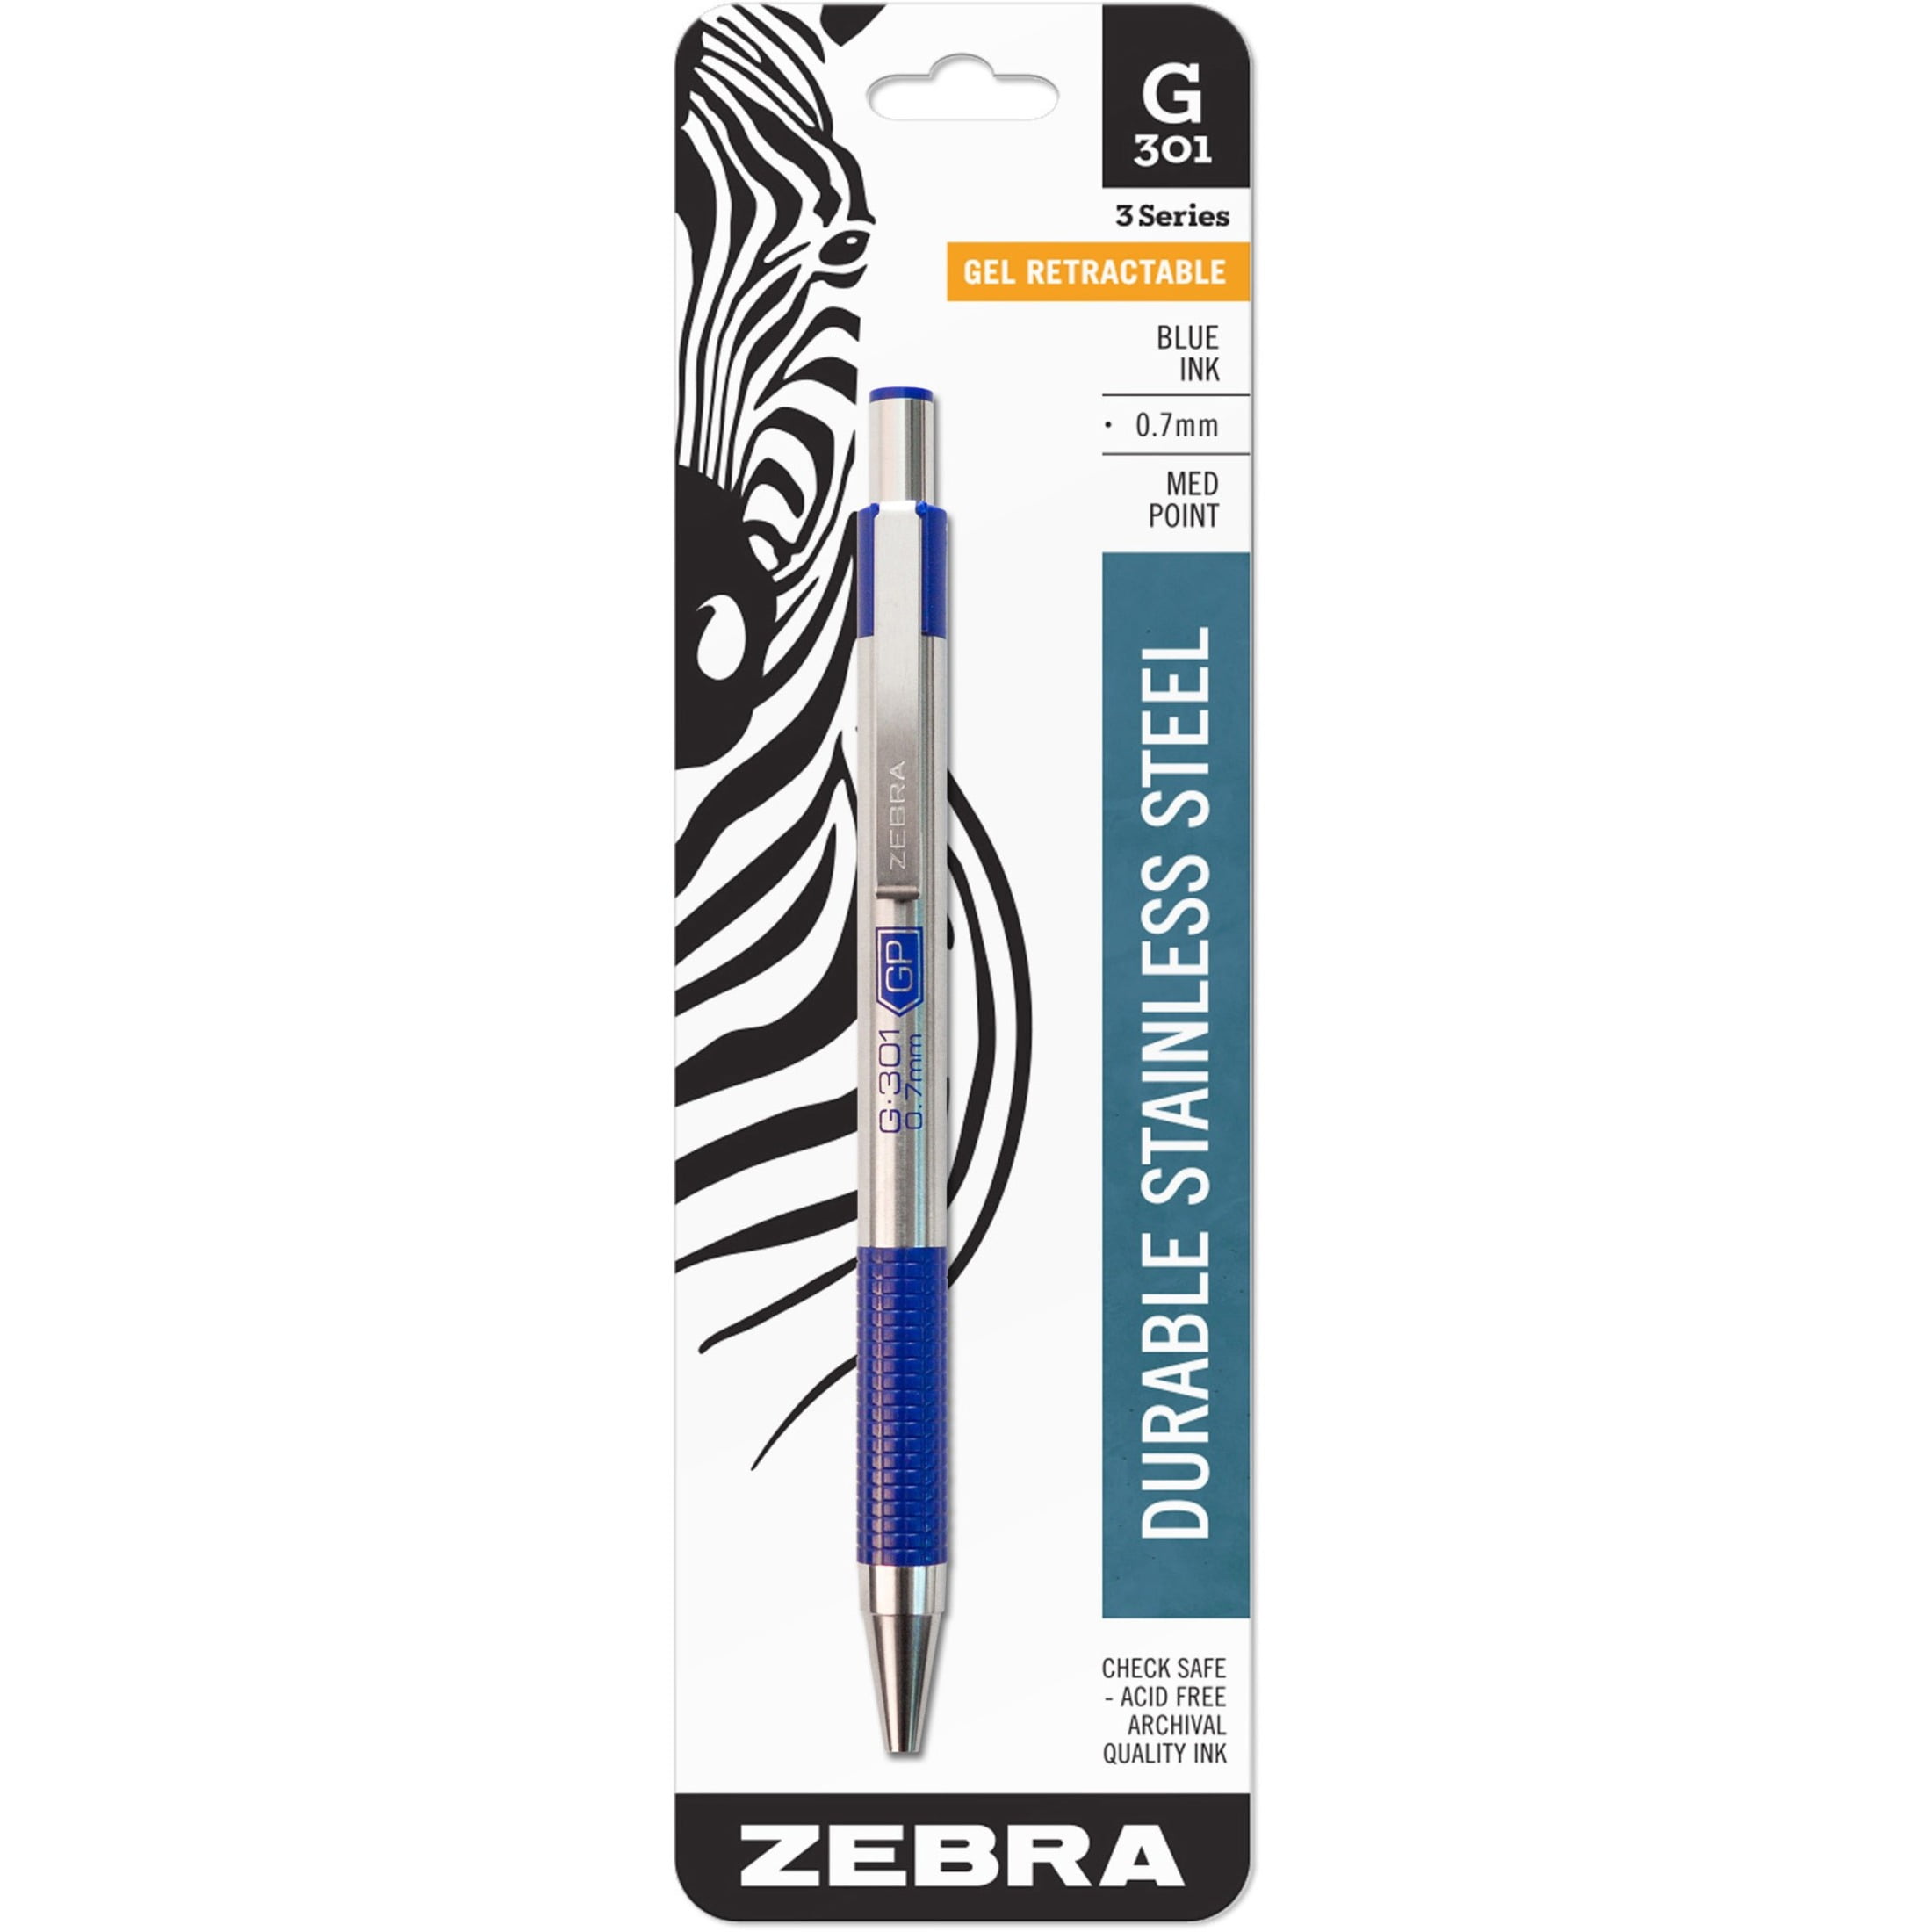 .7mm Point Refillable Retractable BE Sold as 1 Each Gel Pen